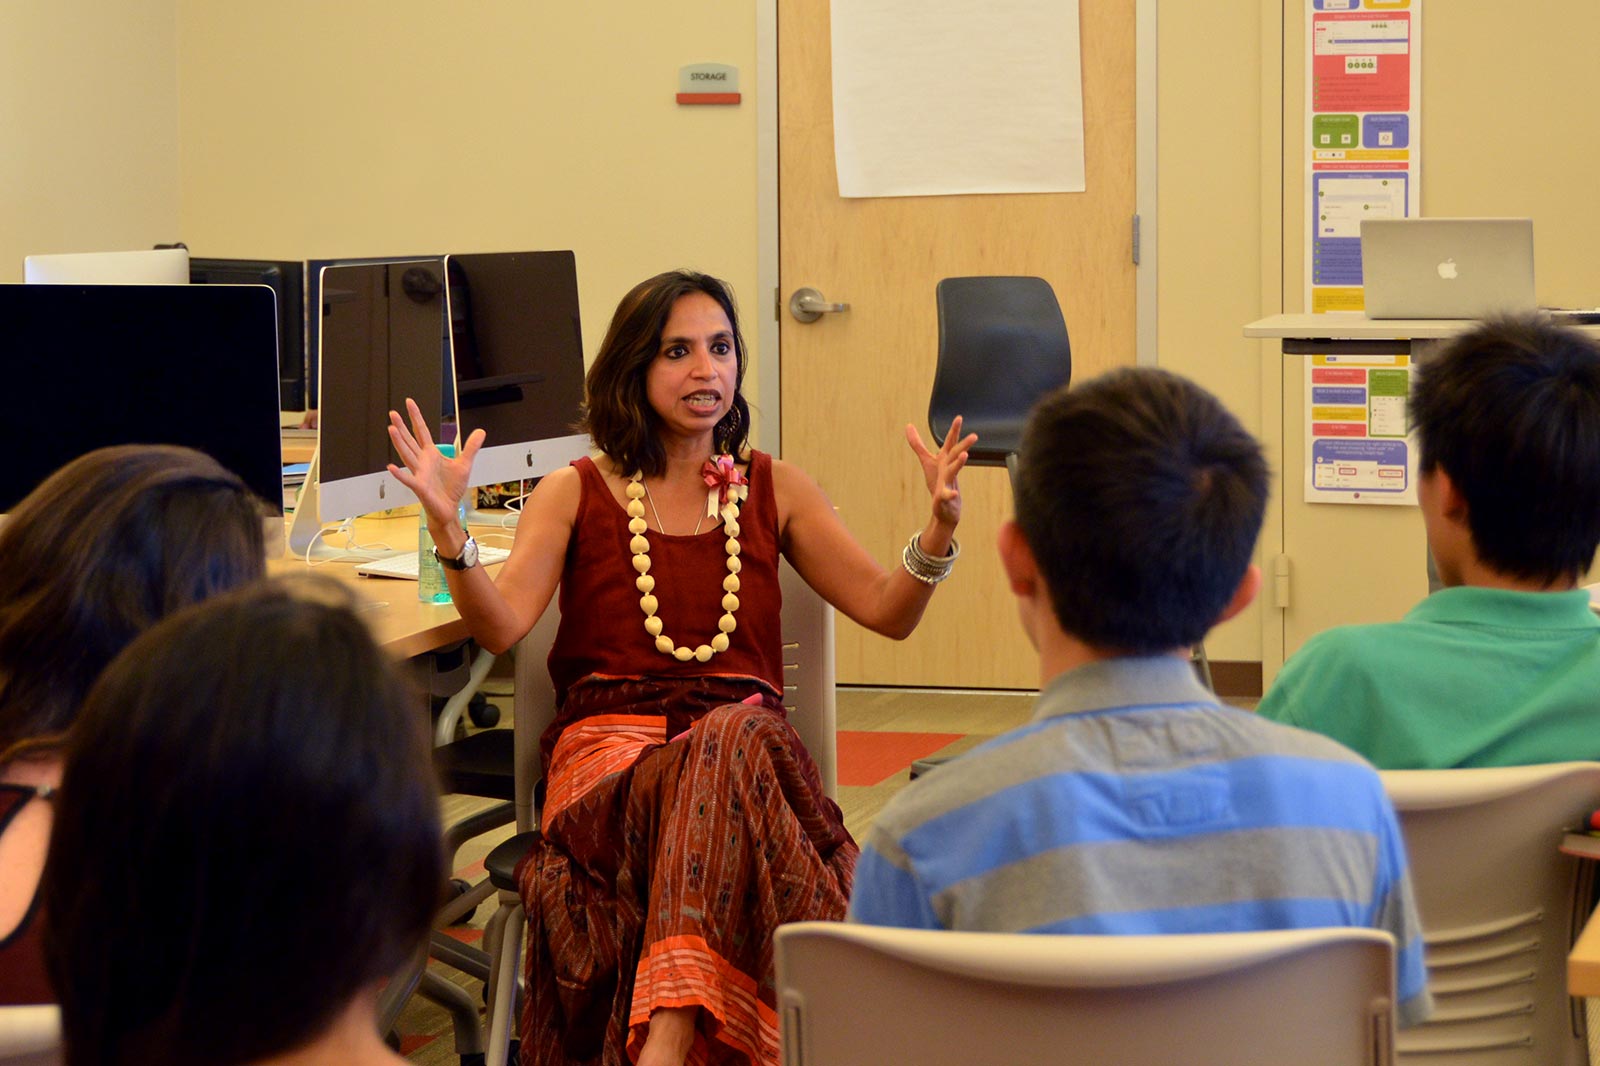 Director Shonali Bose visits the Iolani School to speak about her film Margarita, with a Straw.